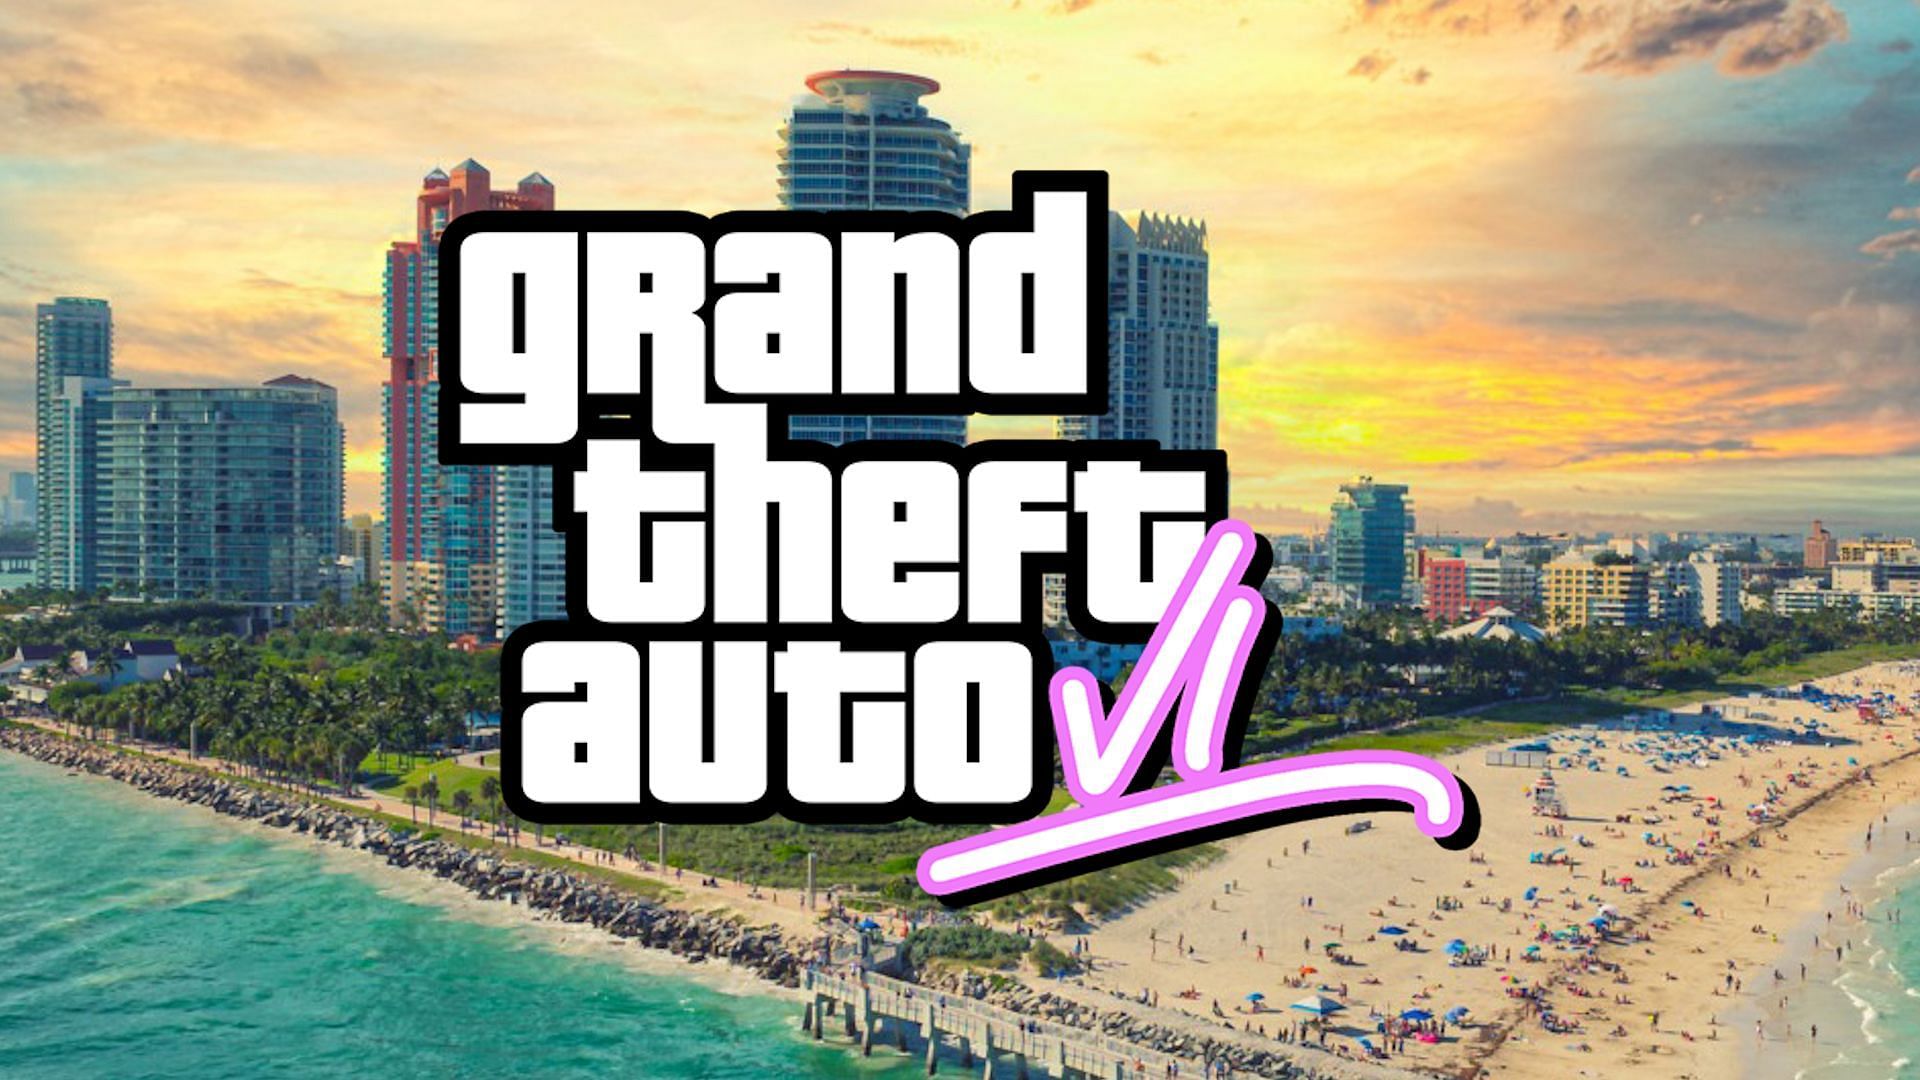 Vice City is an obvious gameplay feature of note, but there are other leaks to address